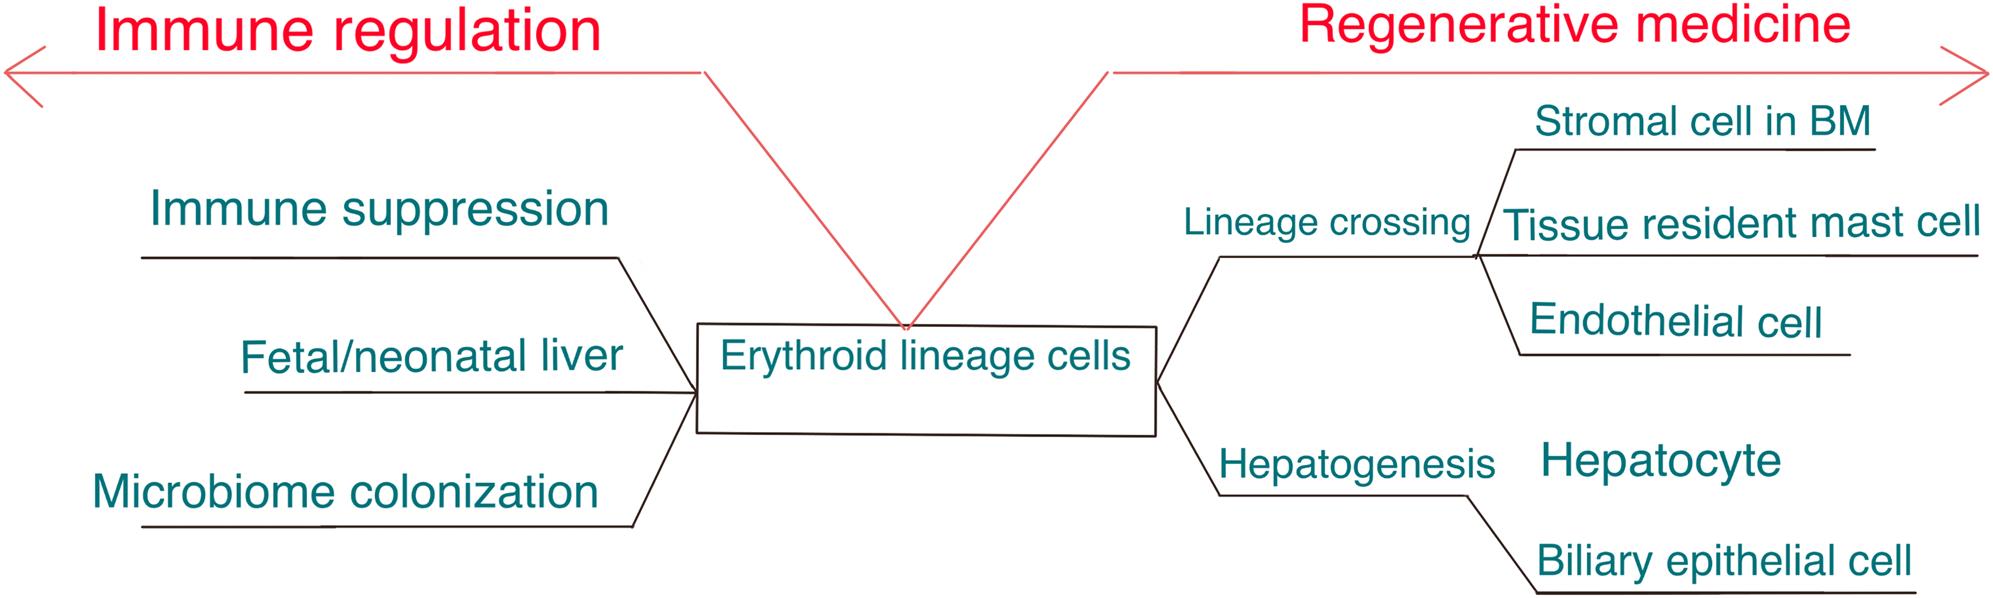 <bold>Emerging roles of erythroid lineage cells in the liver.</bold> Erythroid lineage cells have shown potential of immune regulation and regenerative medicine. Future investigations may highlight their role in immune suppression, fetal/perinatal liver disease and microbiota-host interactions. On the arm of regenerative medicine, their role to participate in lineage crossing and hepatogenesis will be further investigated.